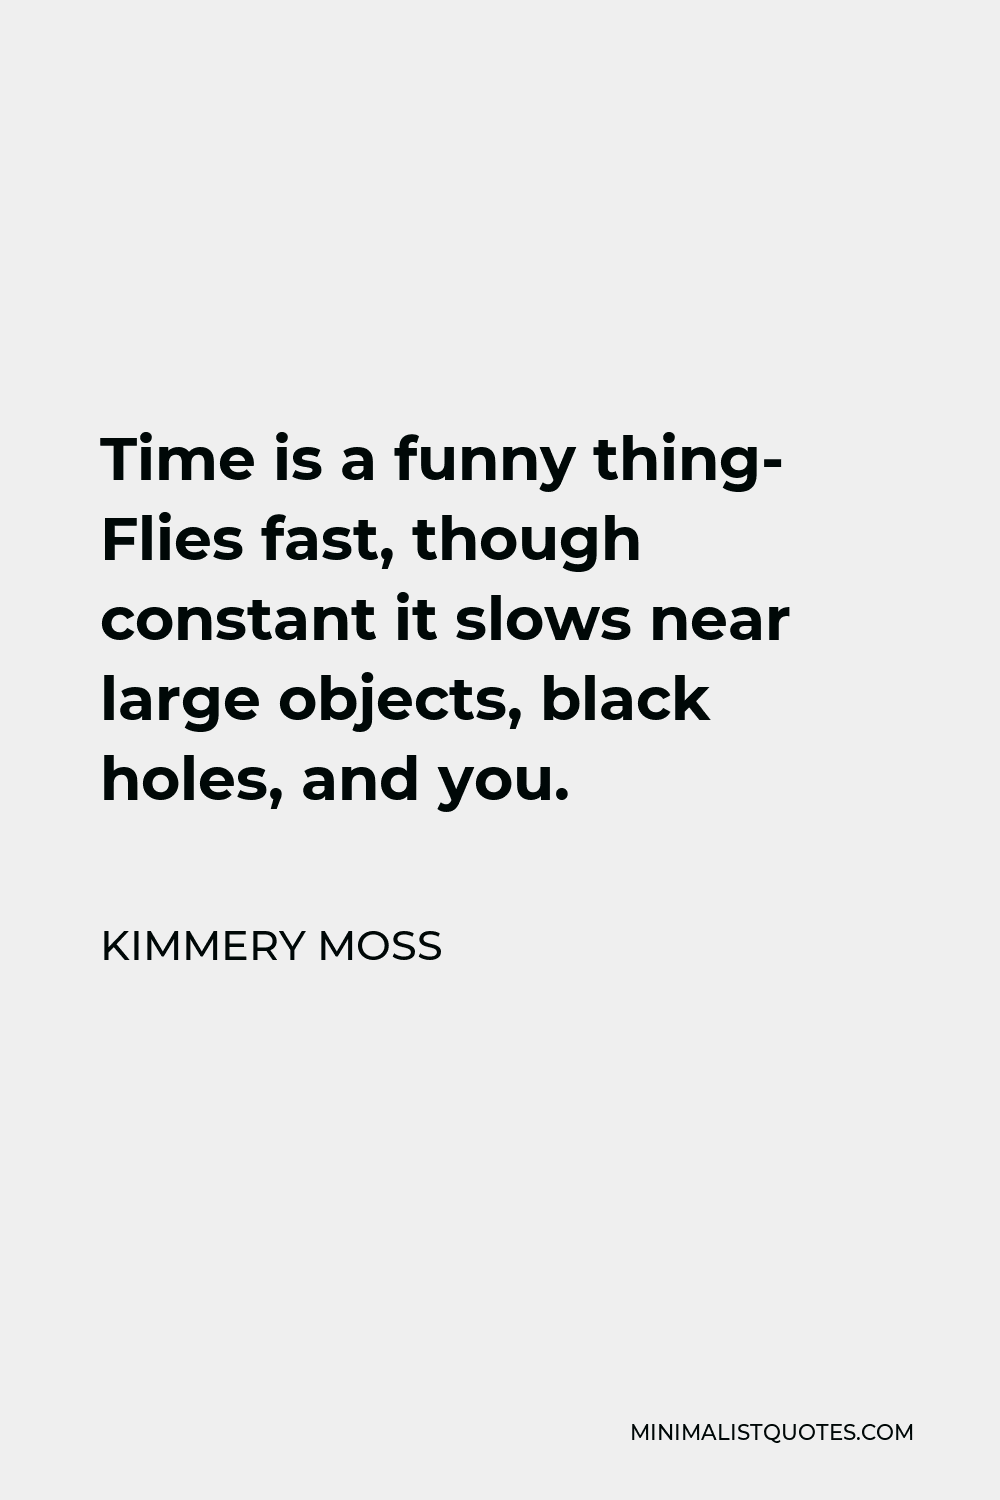 Kimmery Moss Quote - Time is a funny thing- Flies fast, though constant it slows near large objects, black holes, and you.